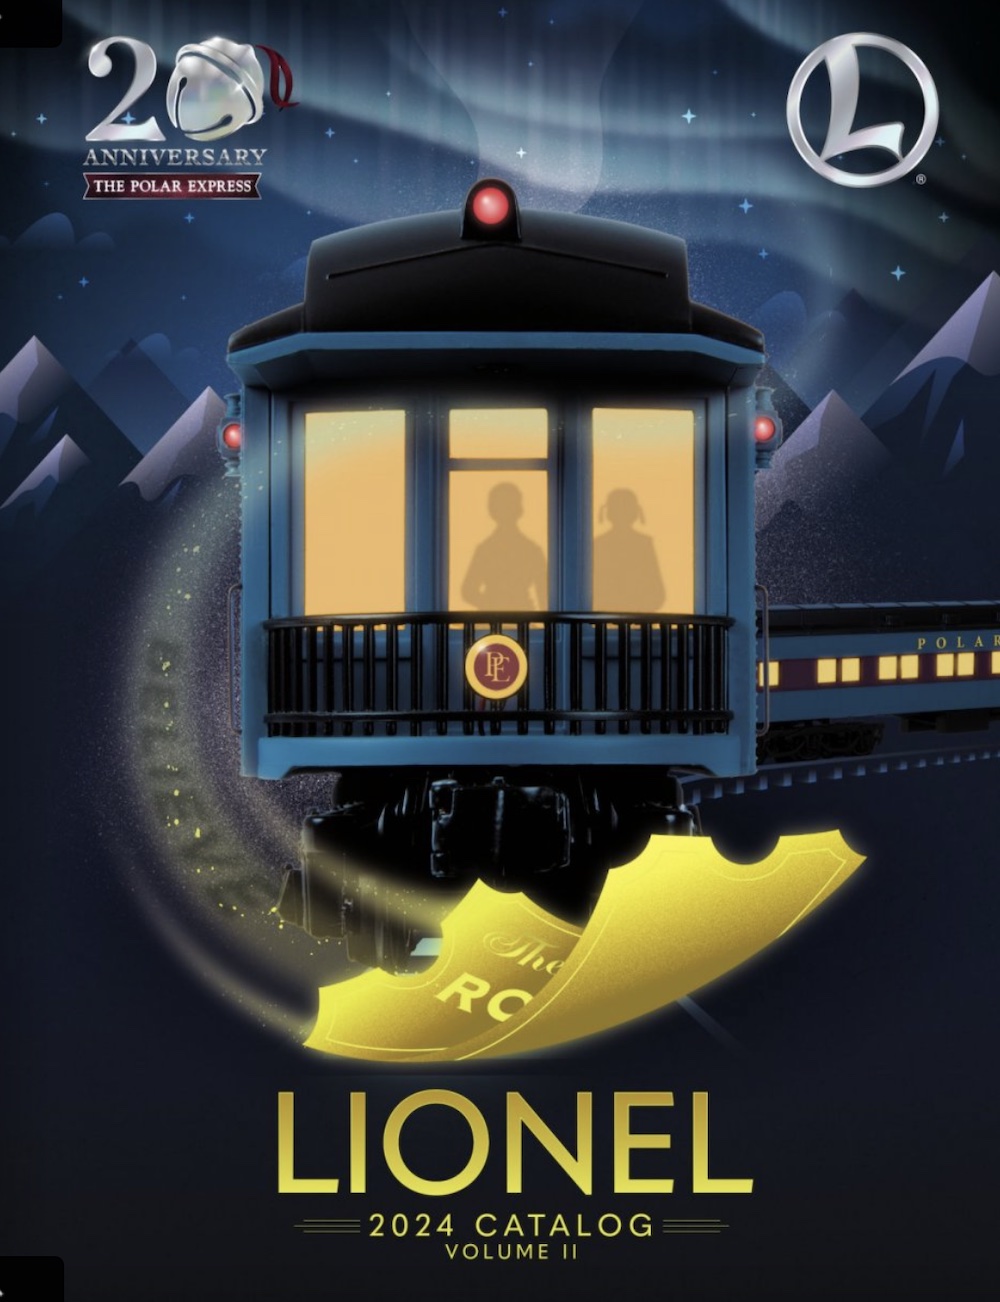 Catalog cover of back of train as part of the author's wish list from Lionel’s 2024 Volume 2 Catalog